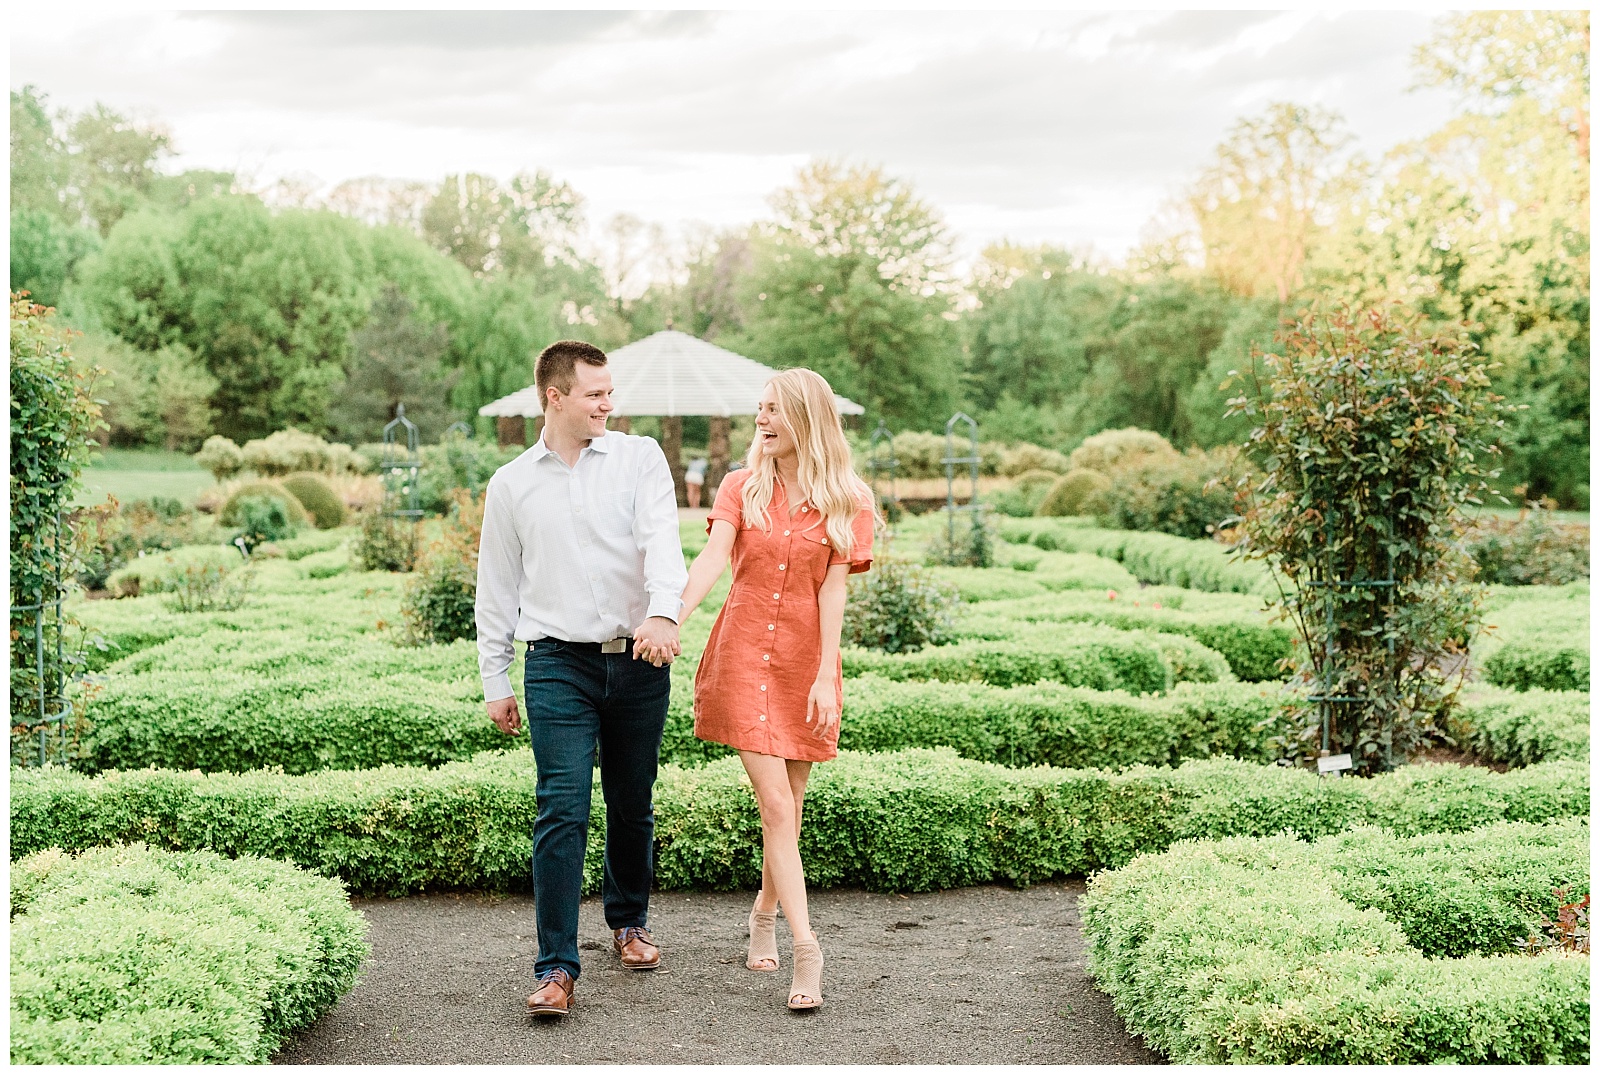 A couple holds hands walking through a garden, laughing together.